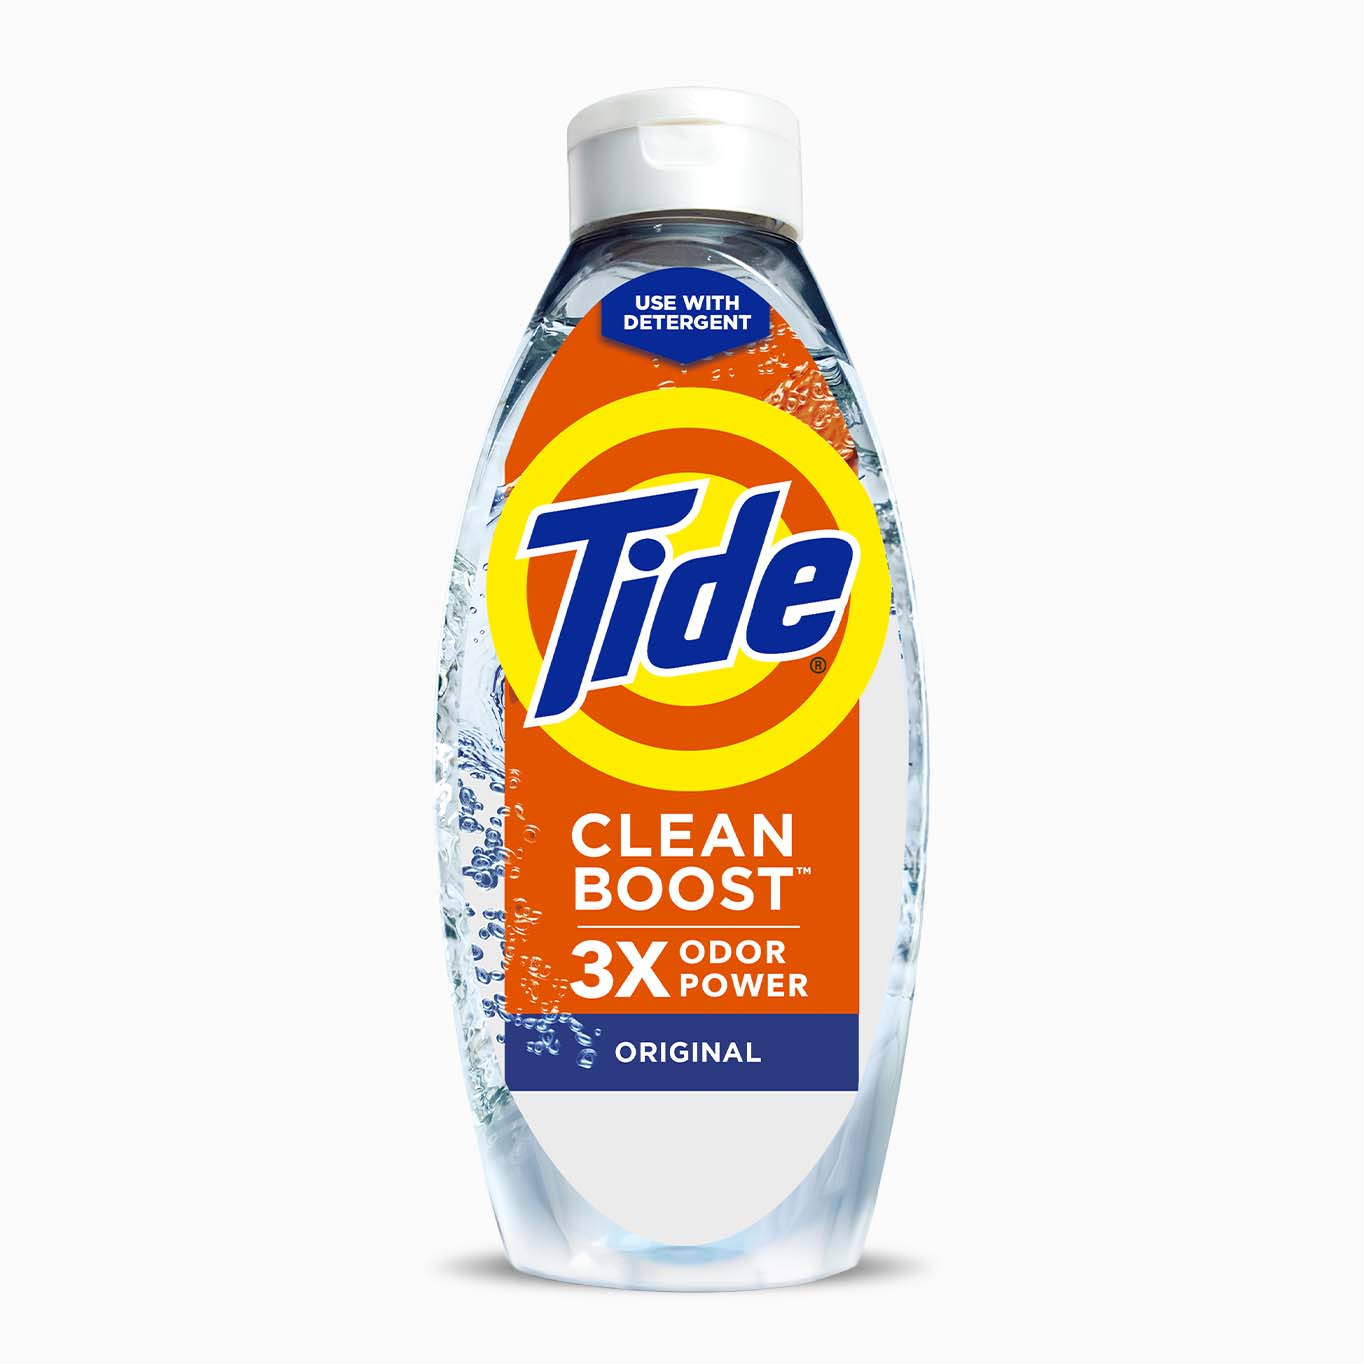 Tide Washing Machine Cleaner with Oxi Powder, Odor Eliminator and Washer  Residue Remover